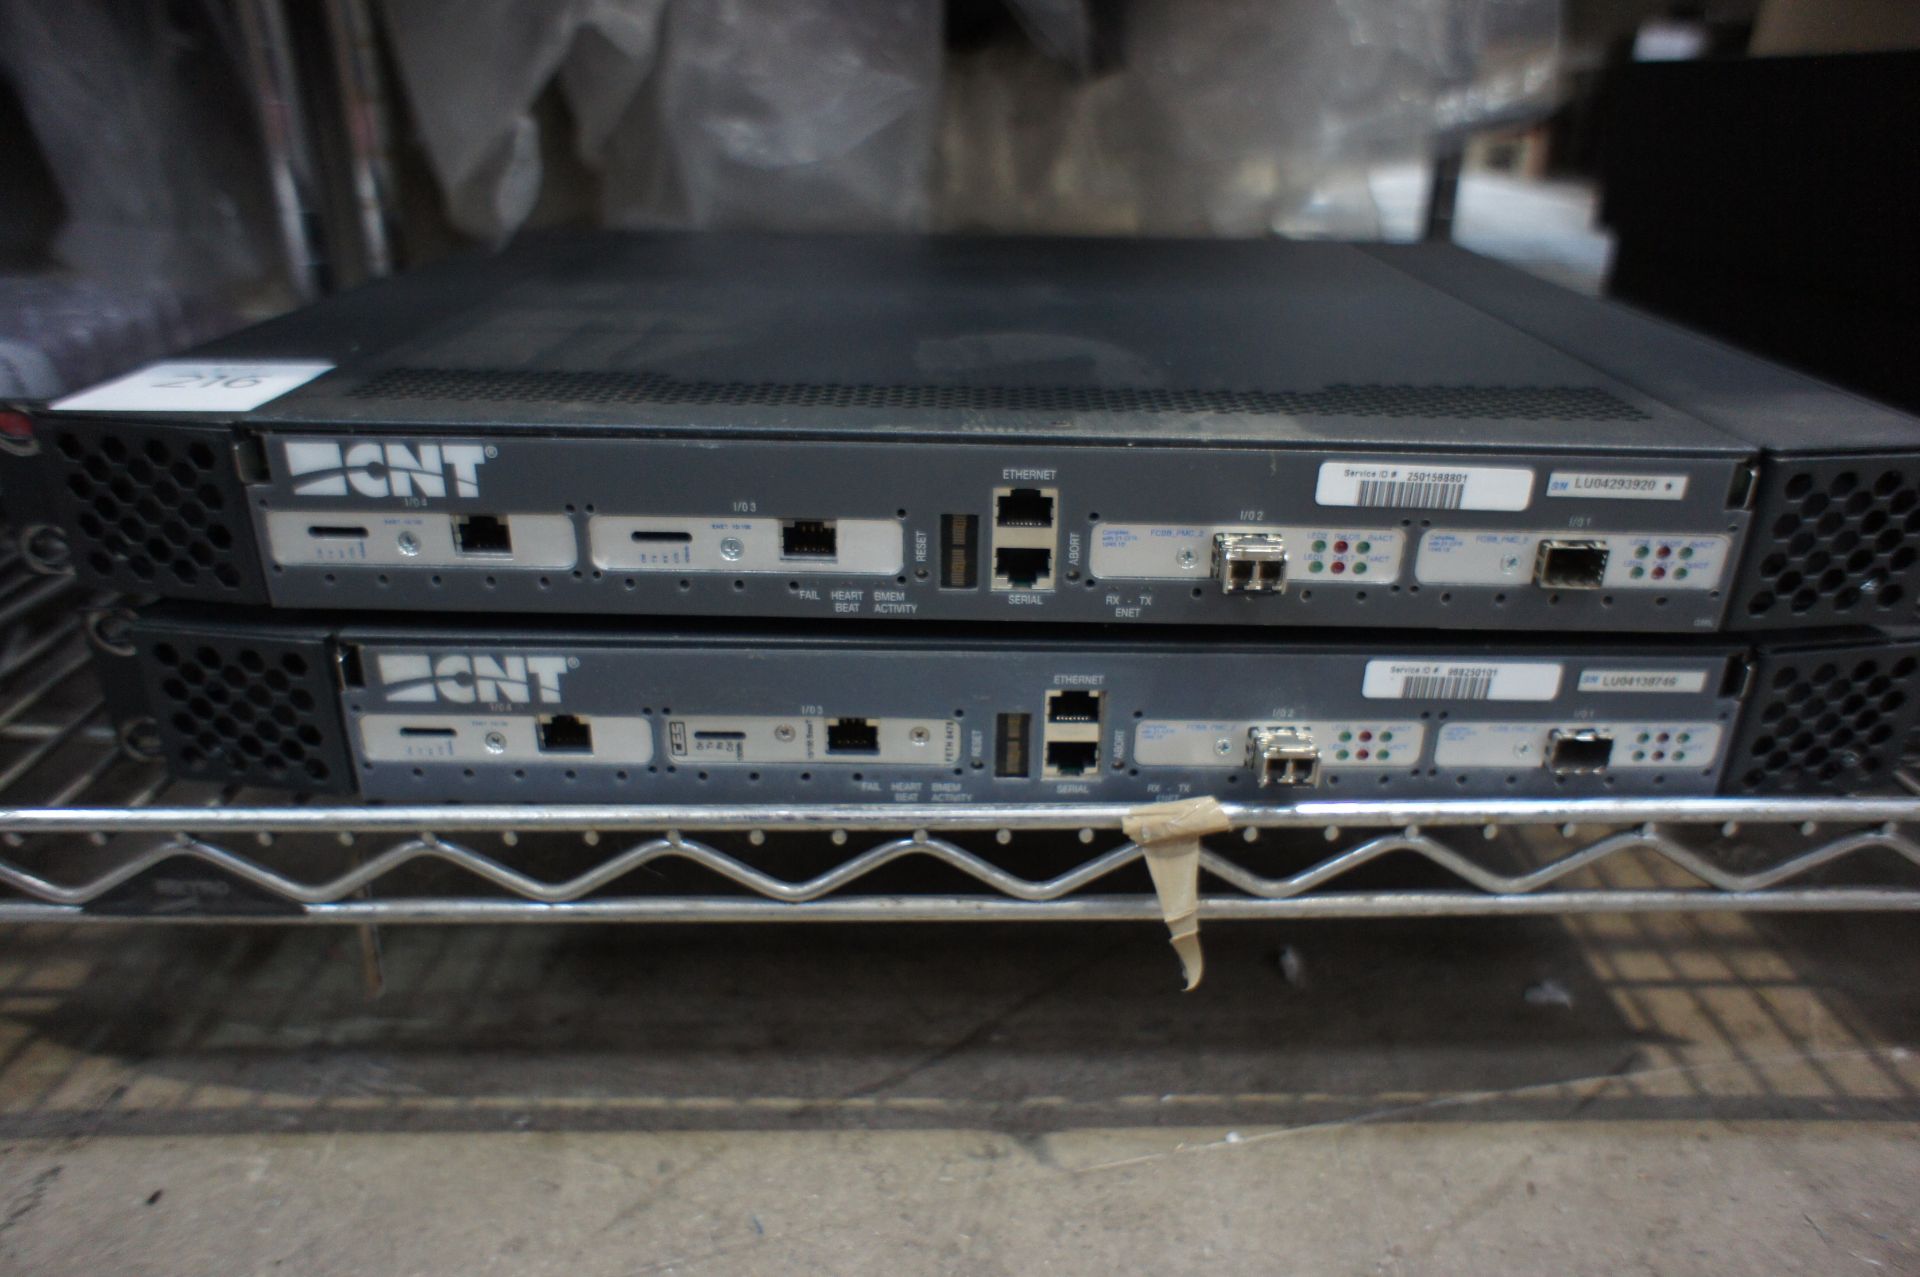 2 CNT EDGE extention unit, EDGE EXTENTION, 2 x Brocade 2109-S16 Switch, FIBRE SWITCH, 1 x Brocade - Image 3 of 31